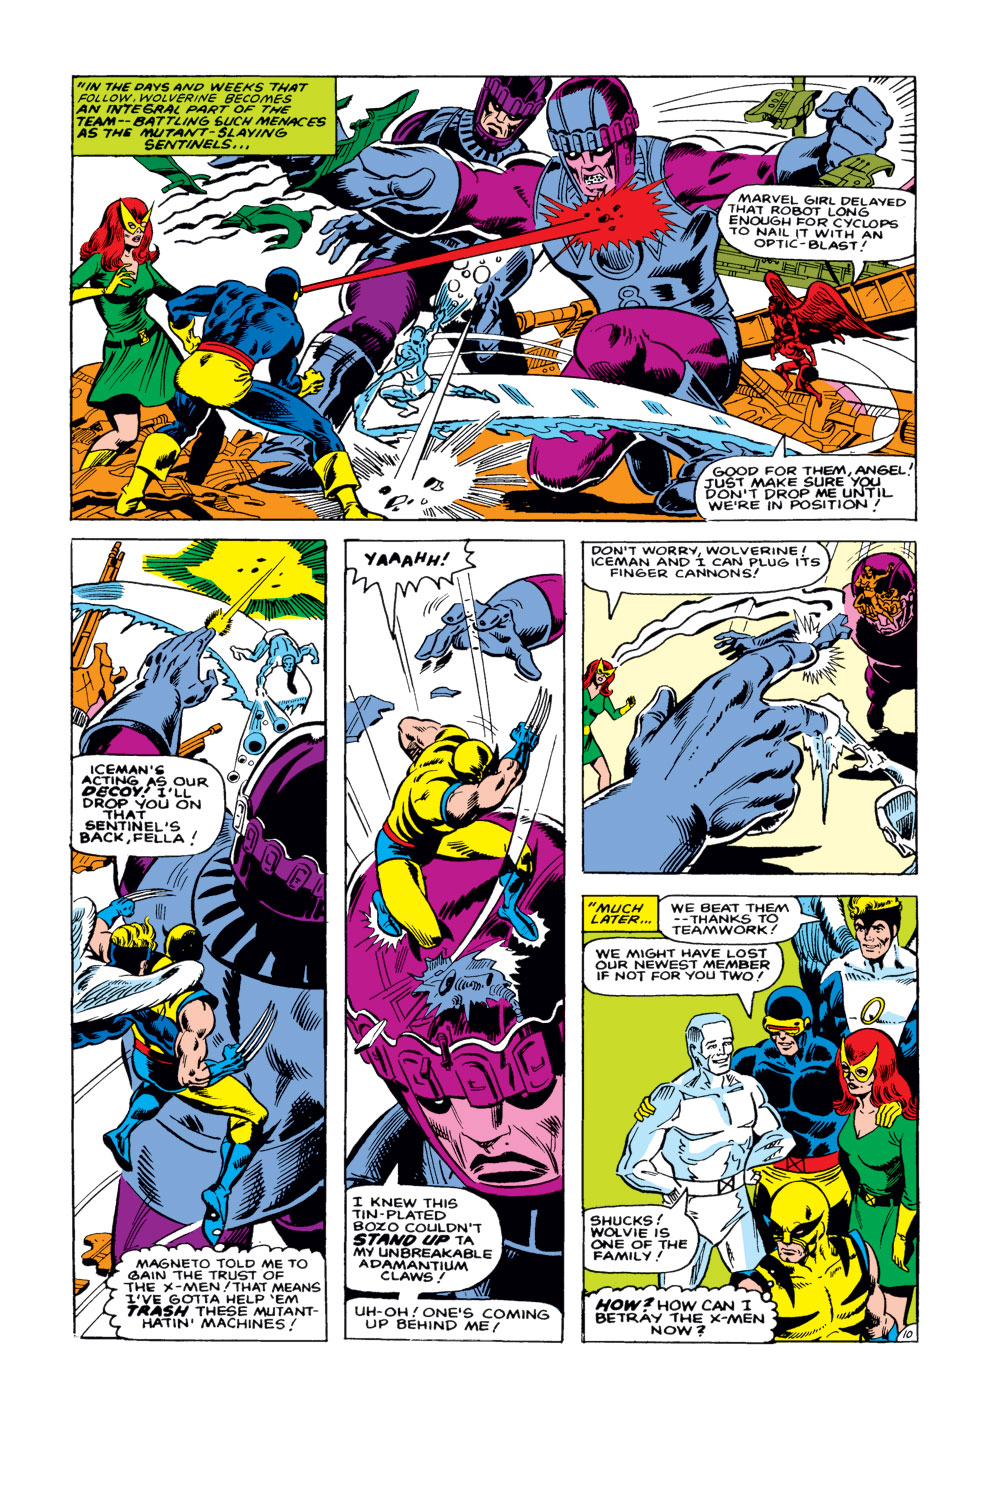 What If? (1977) issue 31 - Wolverine had killed the Hulk - Page 11